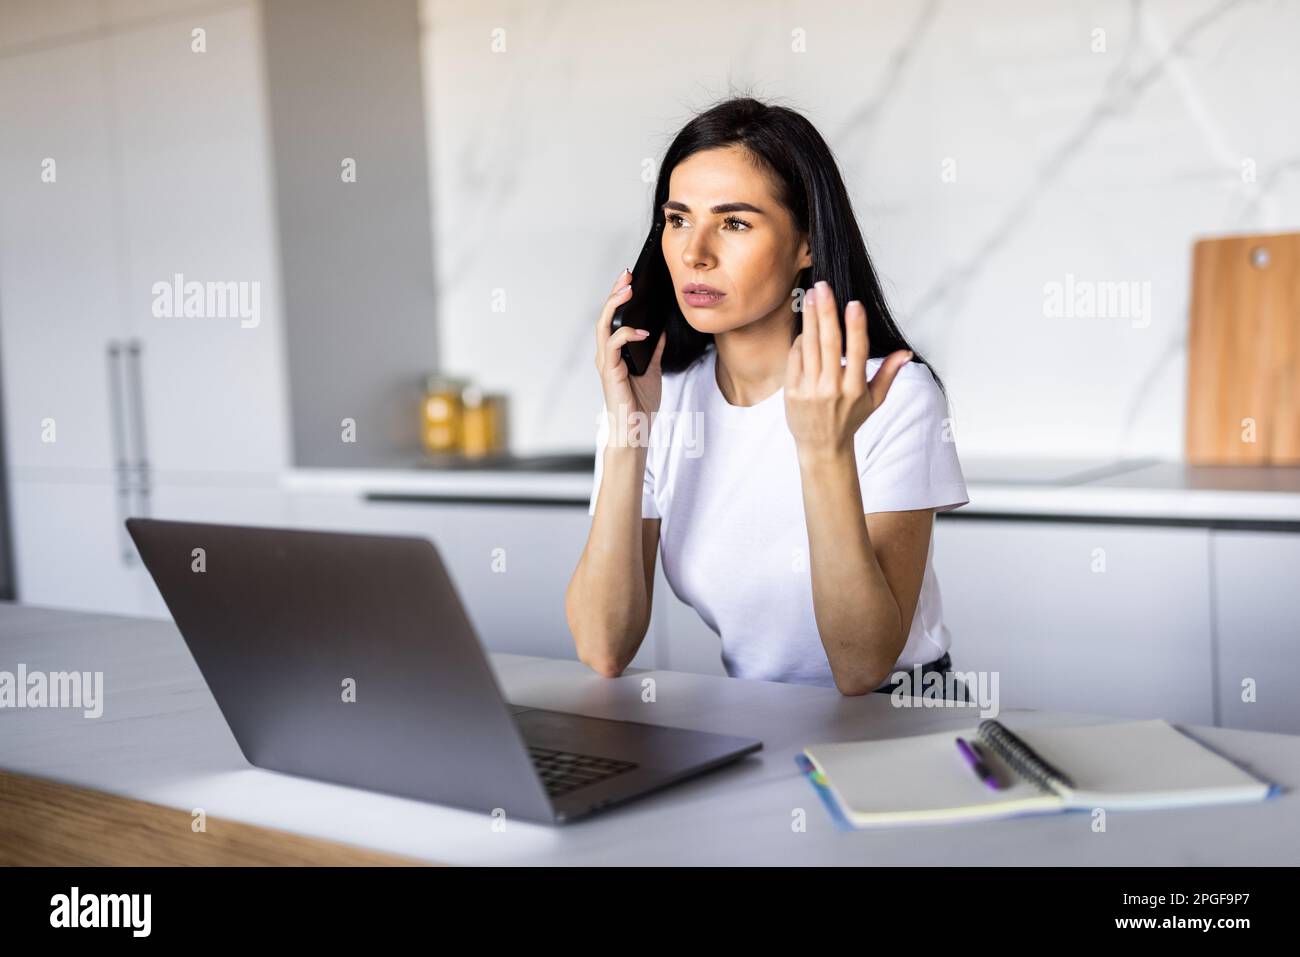 Beautiful young Caucasian woman calling bank using cell phone concerning information on credit card that she is holding. Serious female connecting to Stock Photo